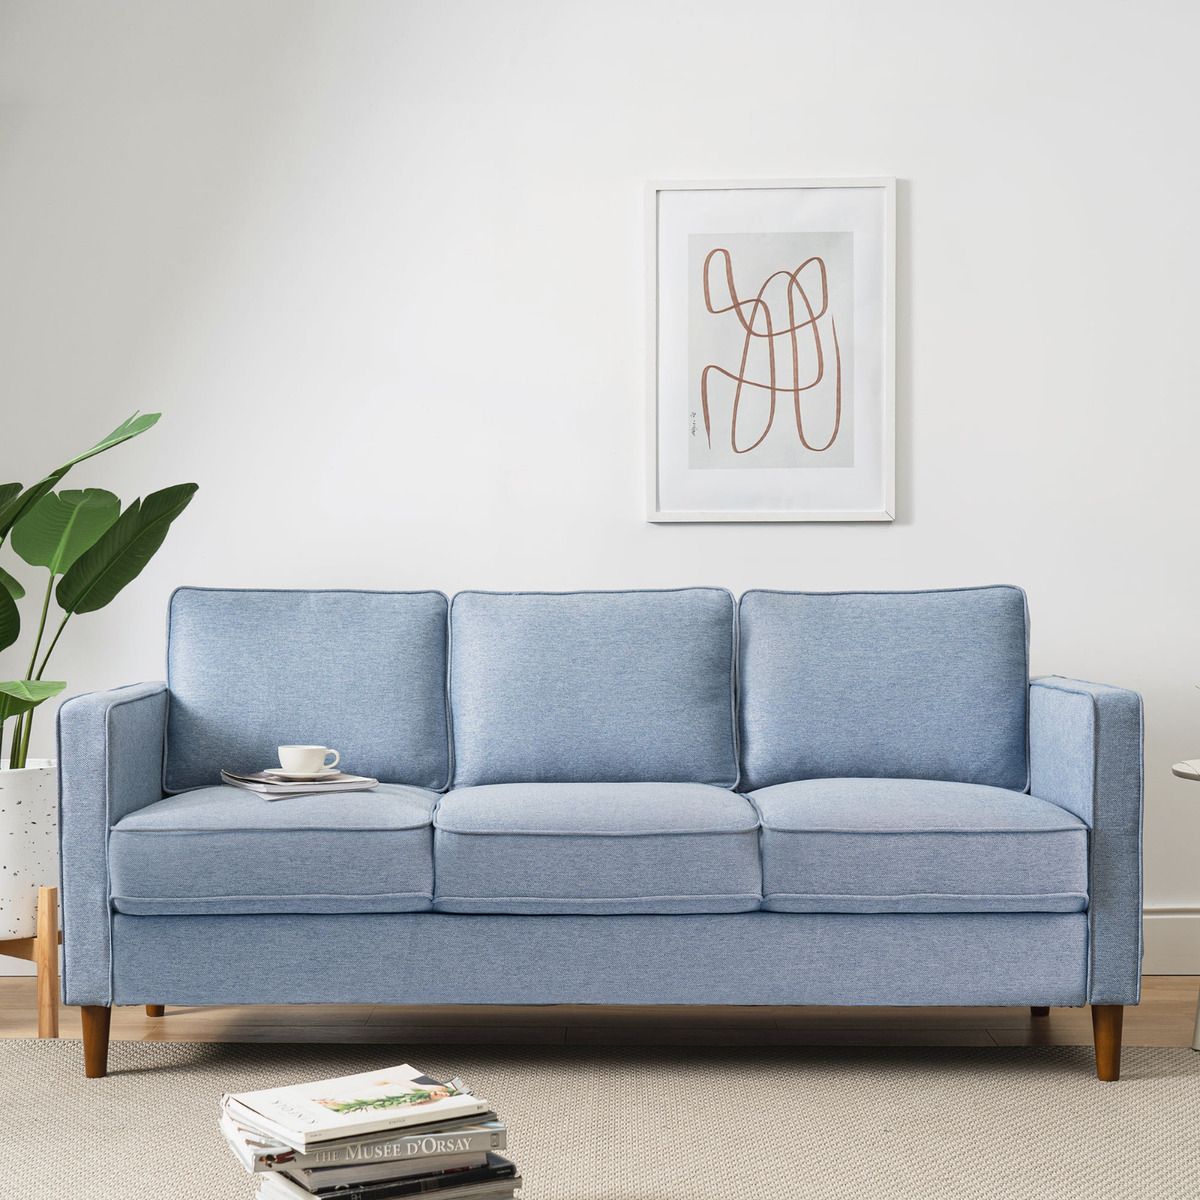 Living Room Sofa Couch Modern 3 Seater Blue Linen Couch With Armrest  Pockets | Ebay Pertaining To Modern Blue Linen Sofas (View 2 of 15)